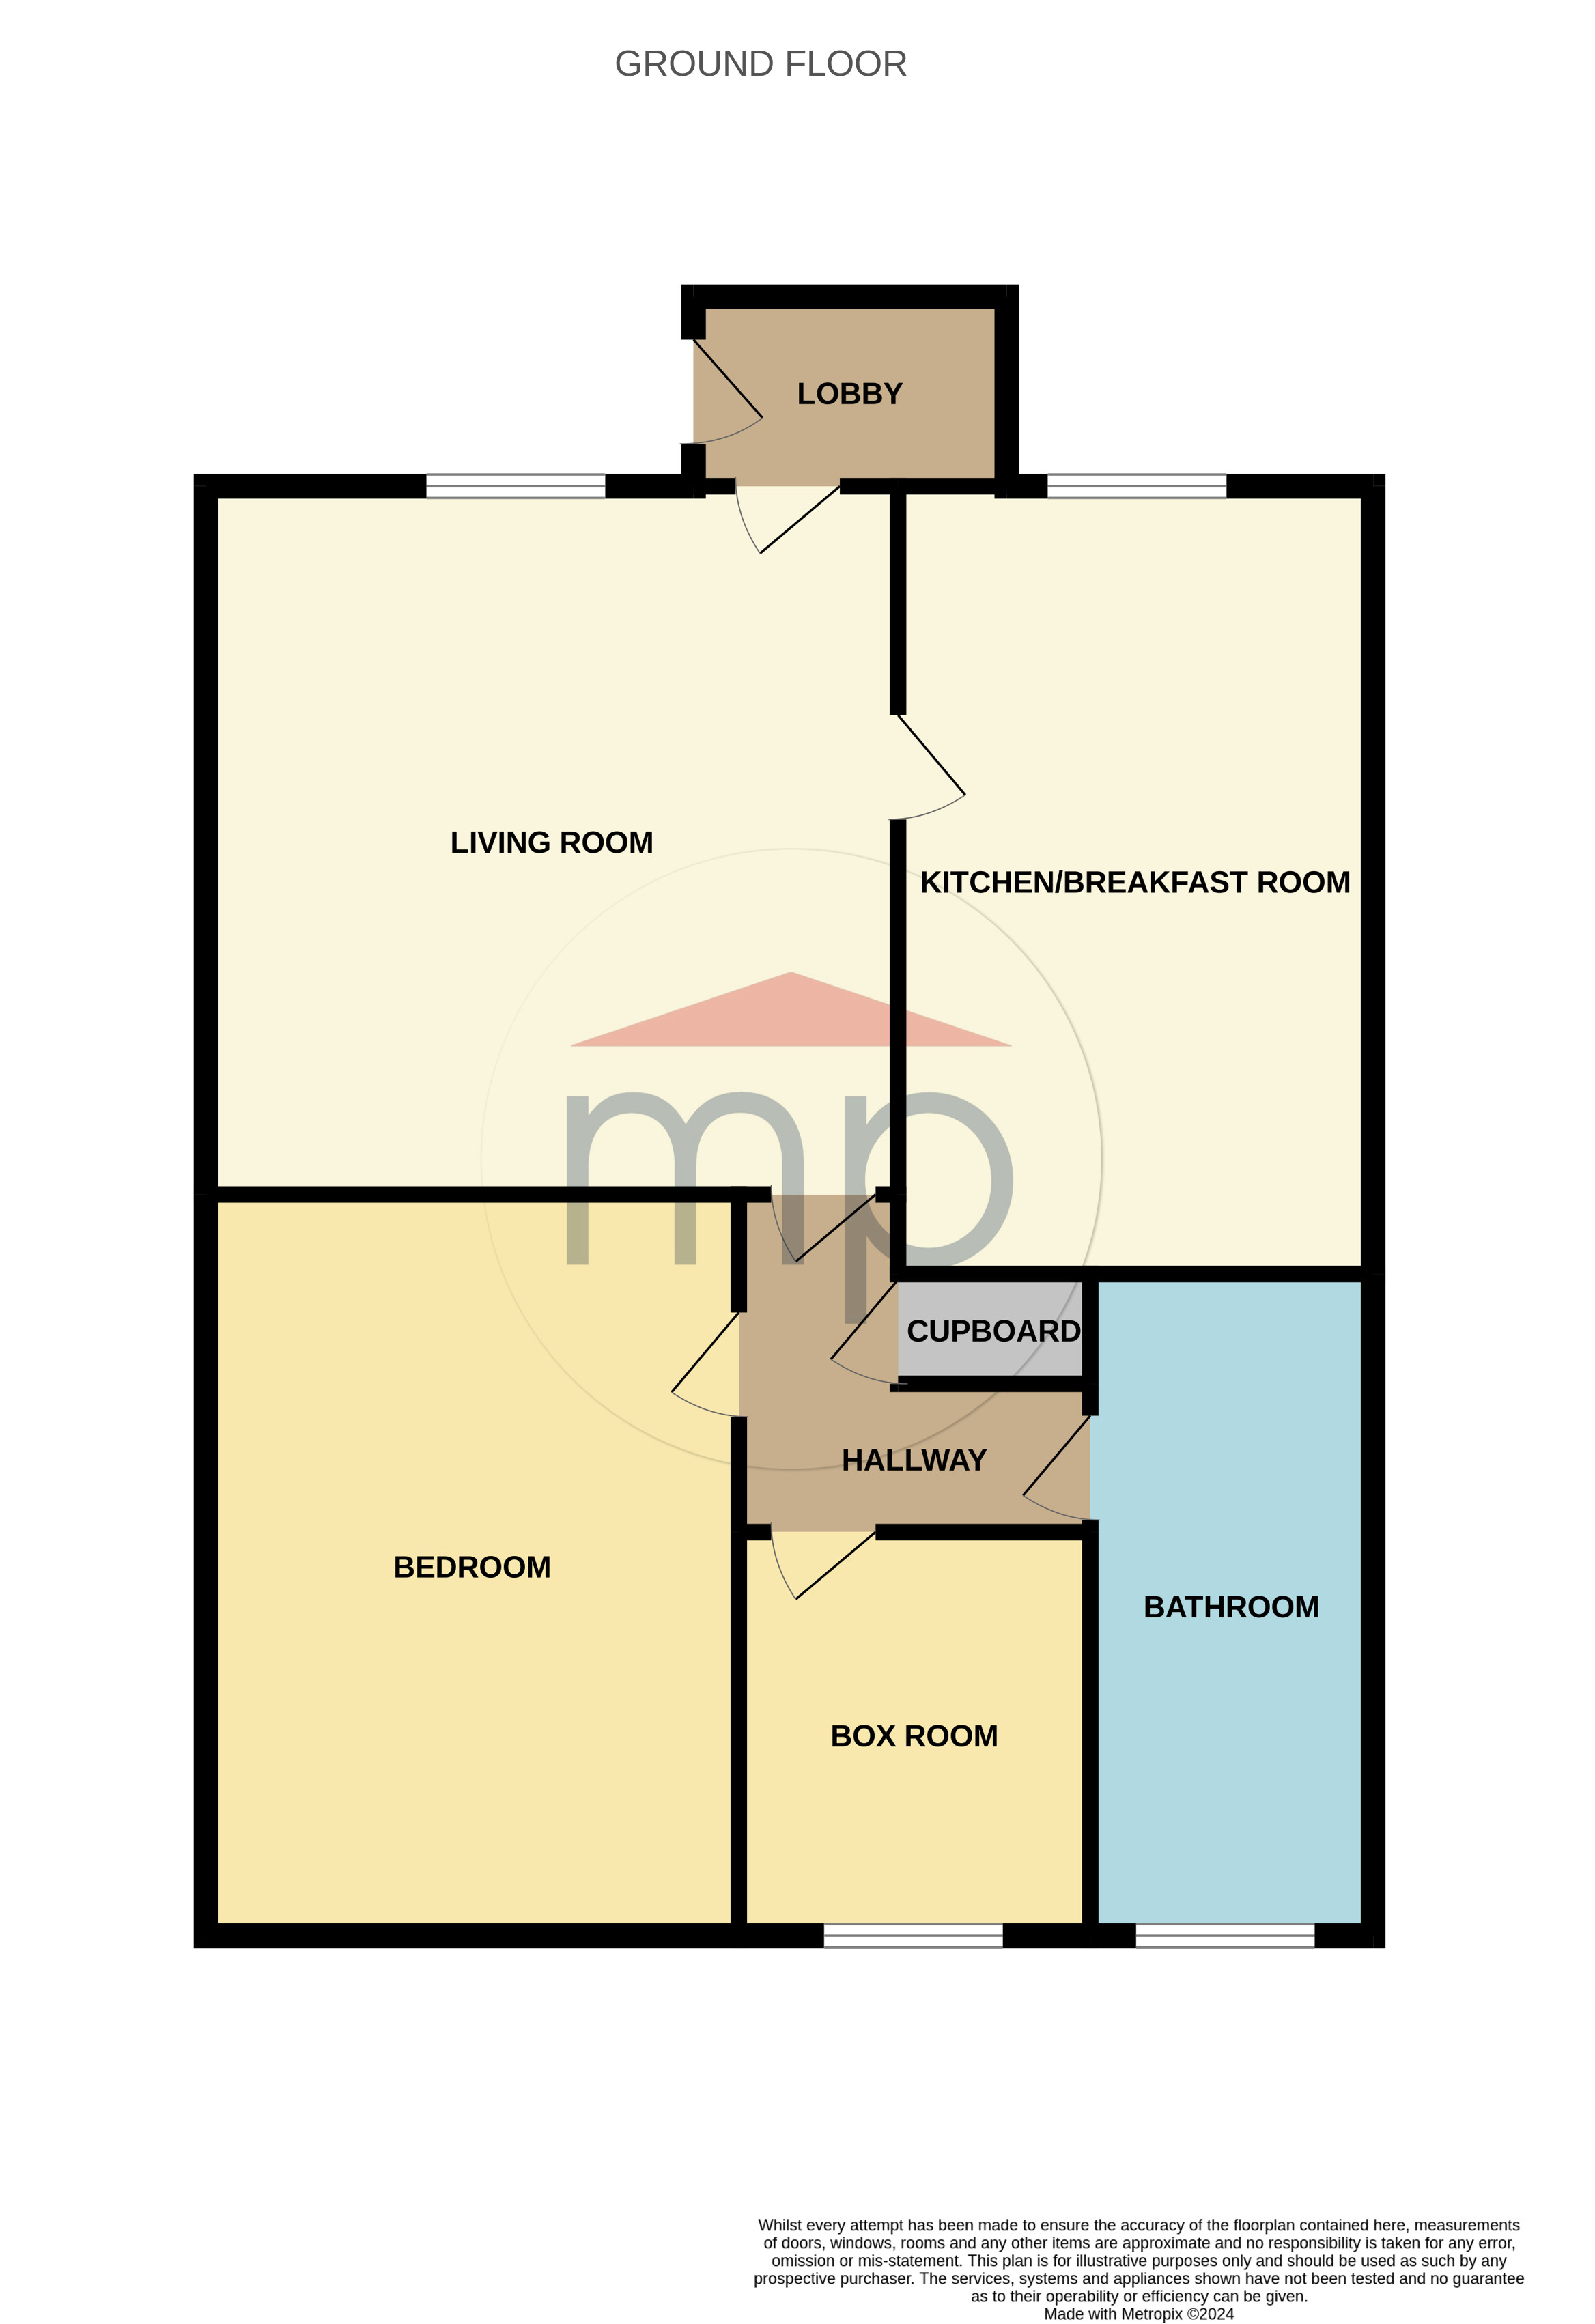 1 bed apartment for sale in Palmerston Street, Stockton-on-Tees - Property floorplan